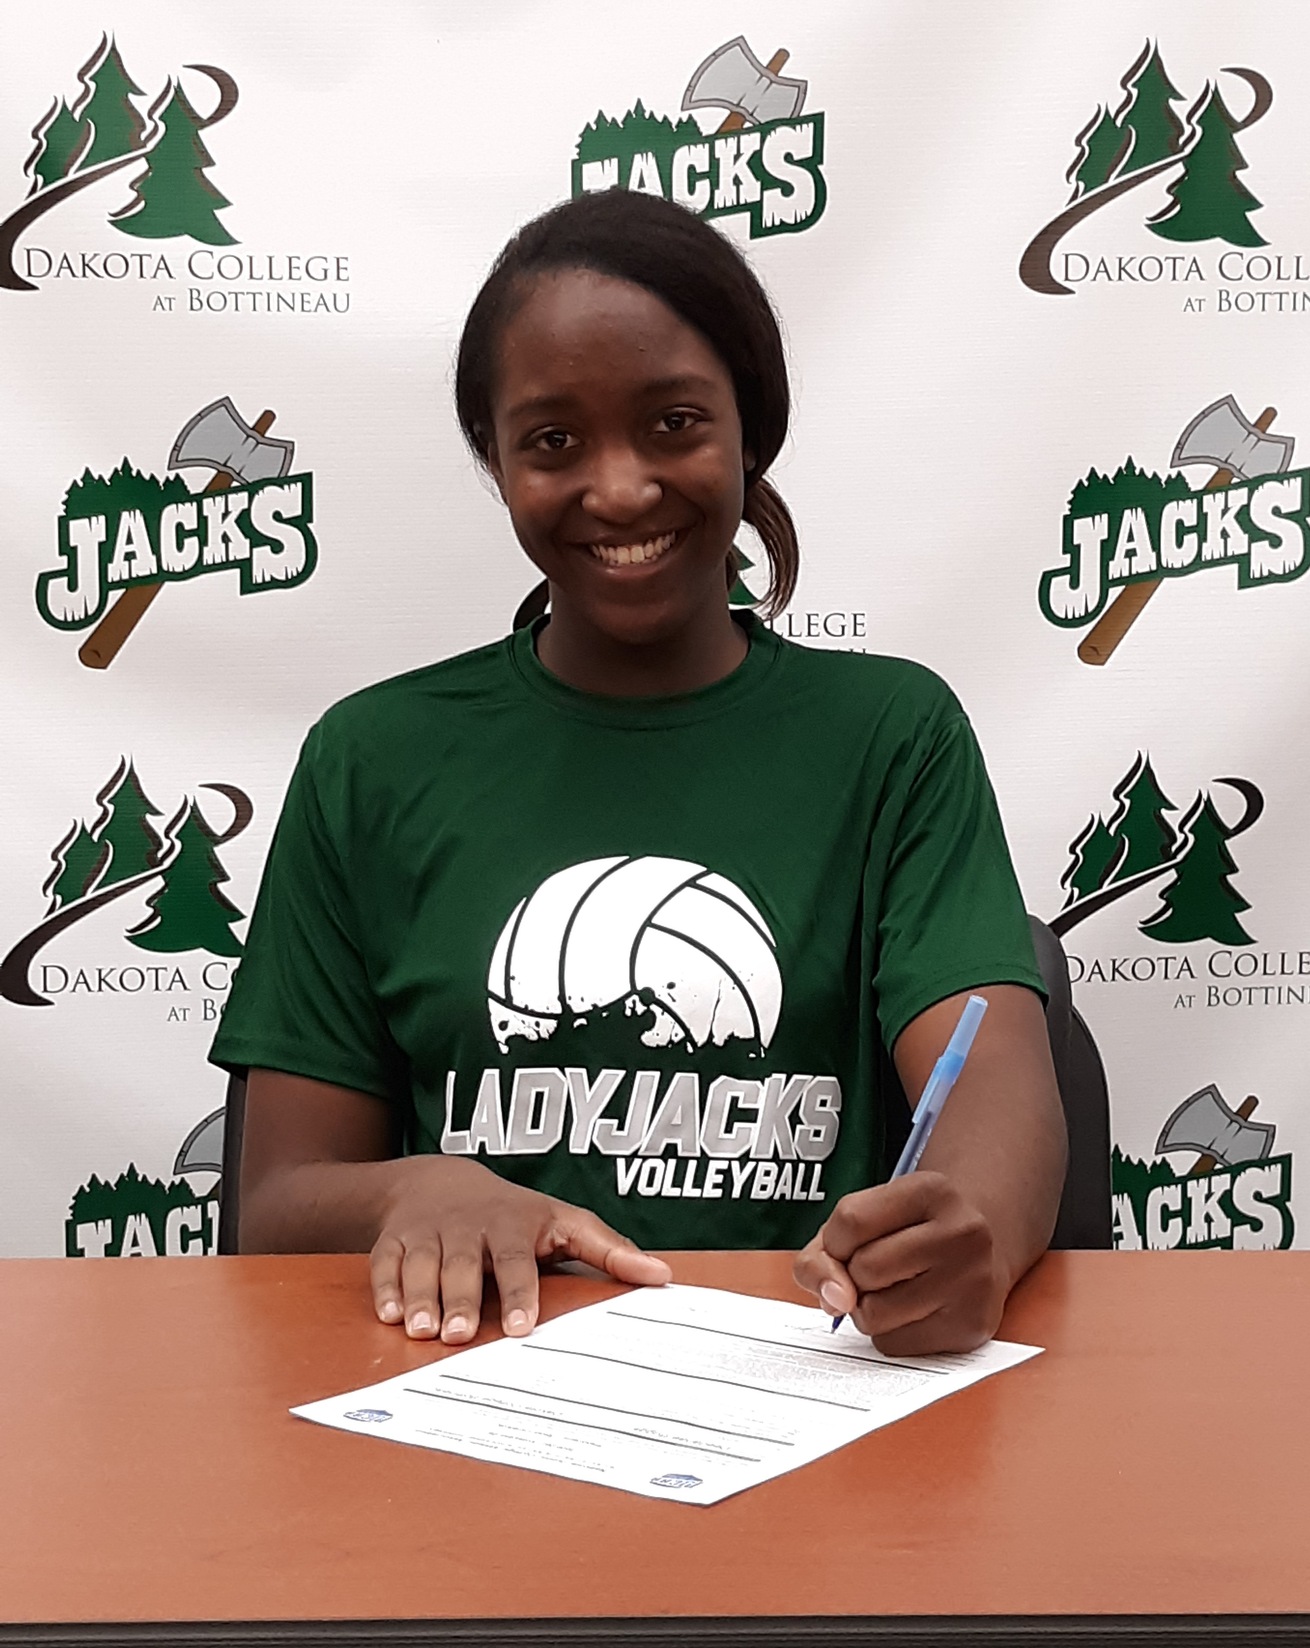 Houston, Texas Senior DeeJanae Buggs has signed an NJCAA Letter of Intent to play for the Ladyjacks volleyball team in 2020.